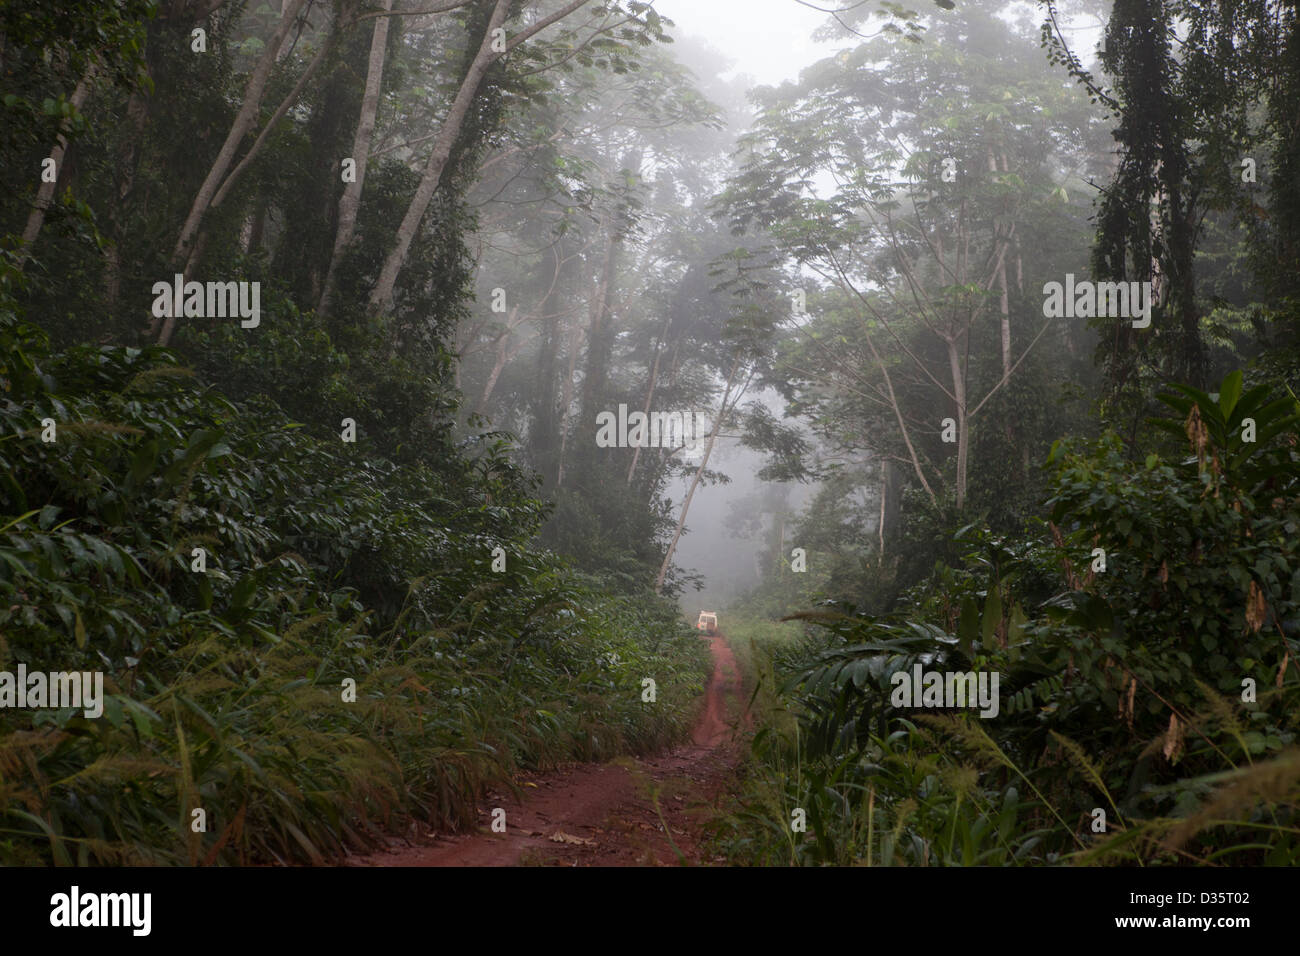 CONGO, 29th Sept 2012: Early morning mist over the forest. Stock Photo